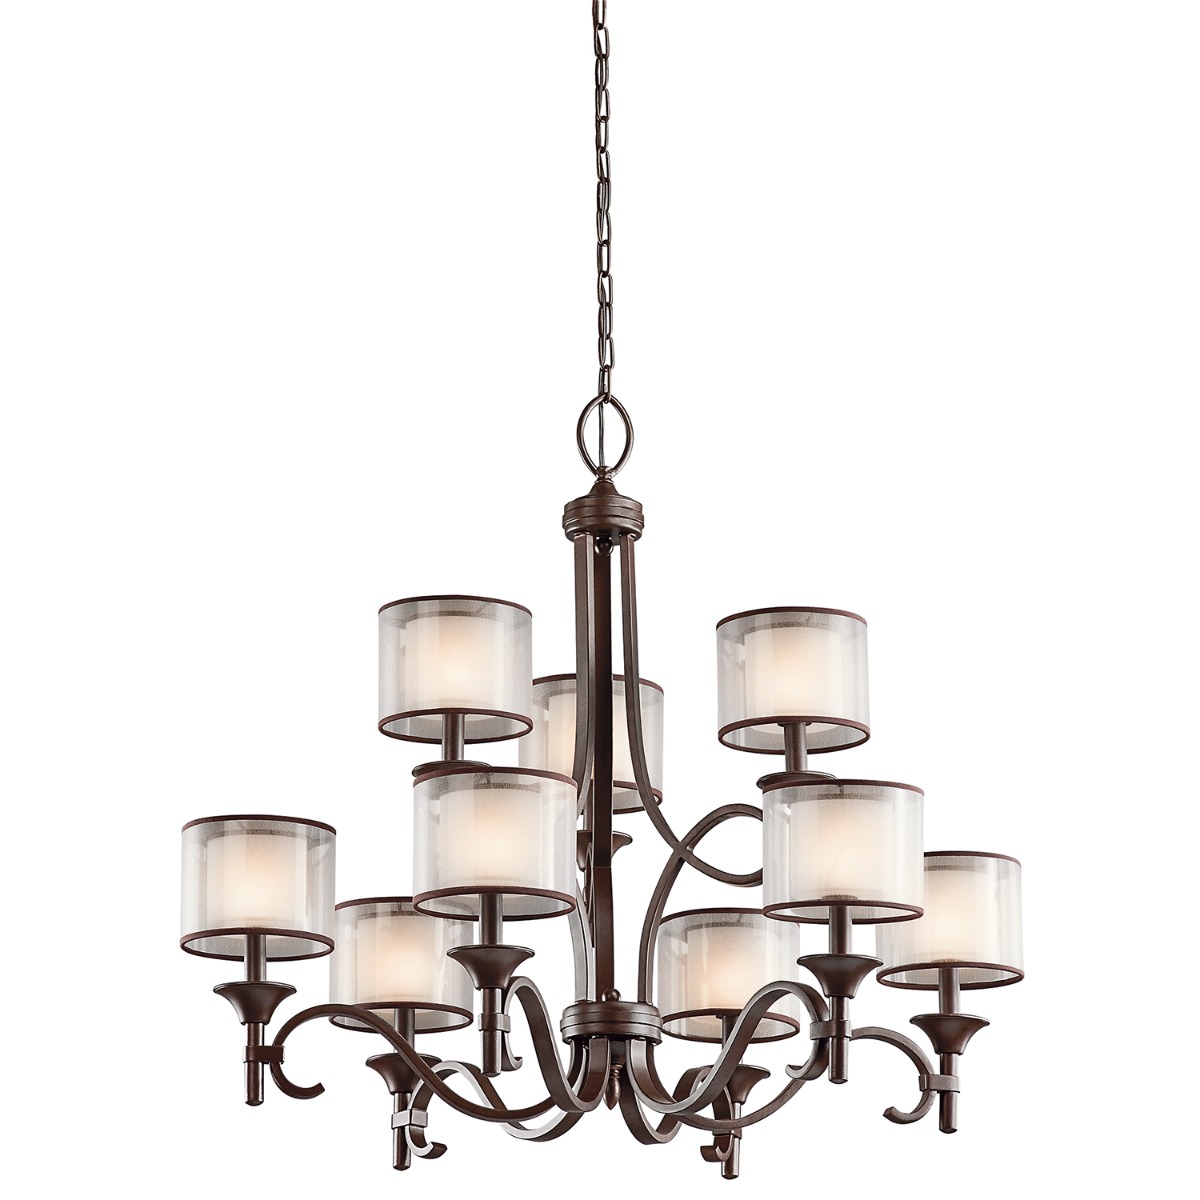 Image of KL-LACEY9-MB Lacey 9 Light Bronze Ceiling Light with Double Layer Shades